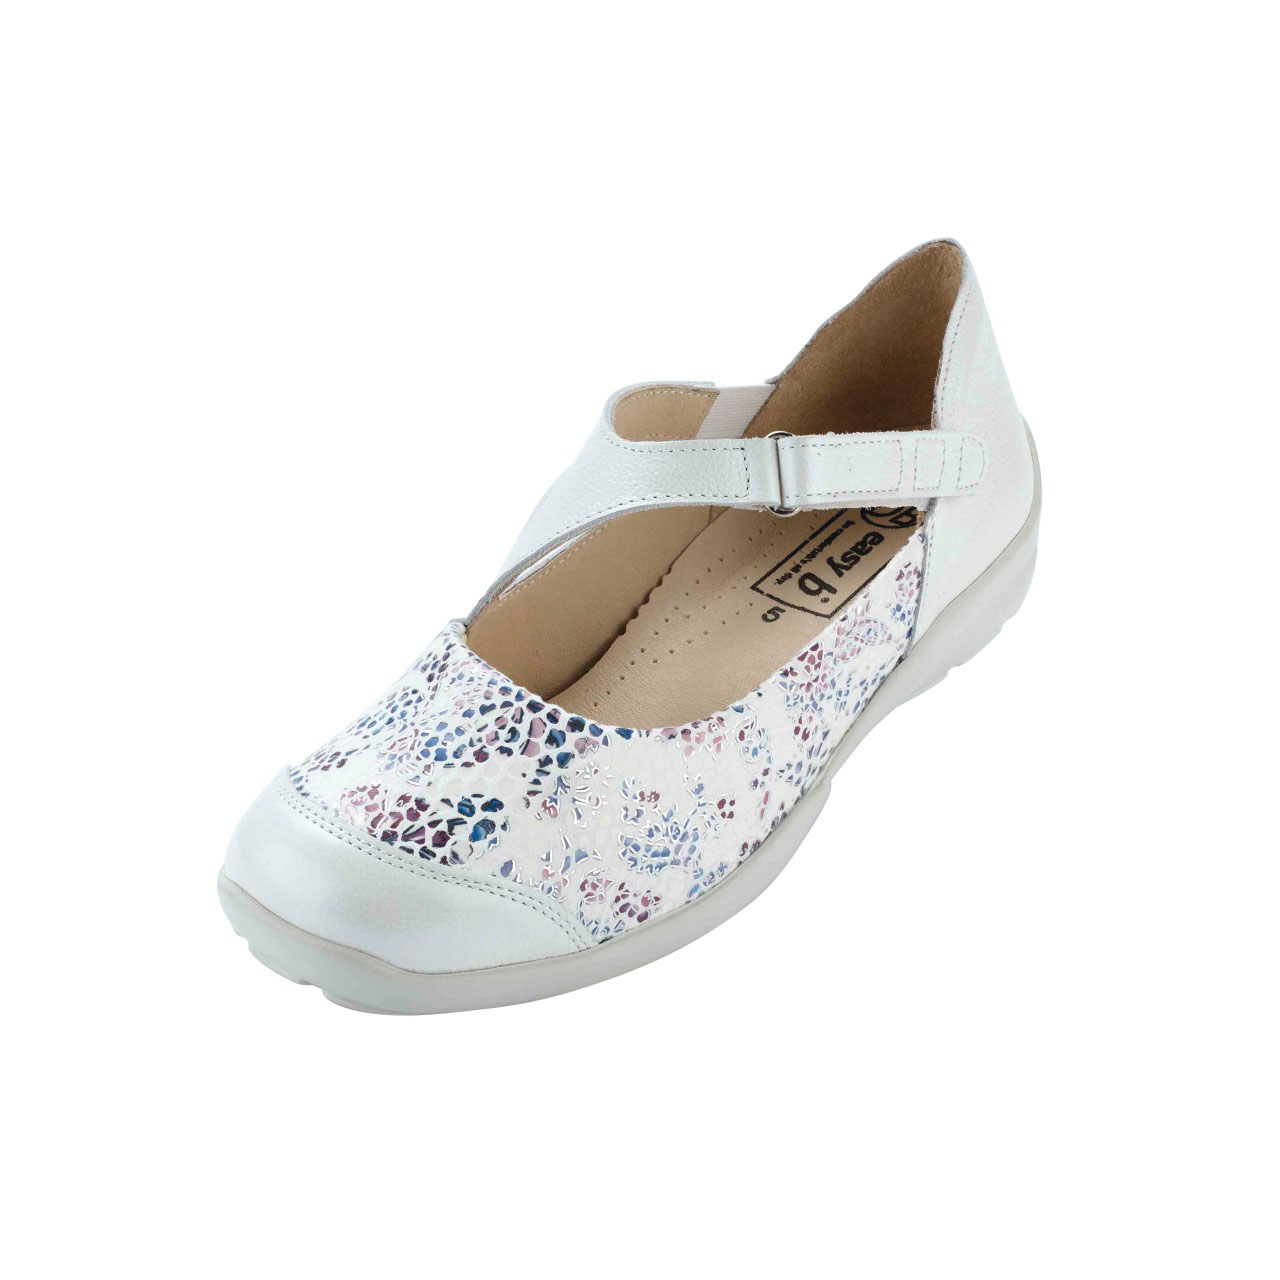 Extra-wide Stretch Floral Shoes